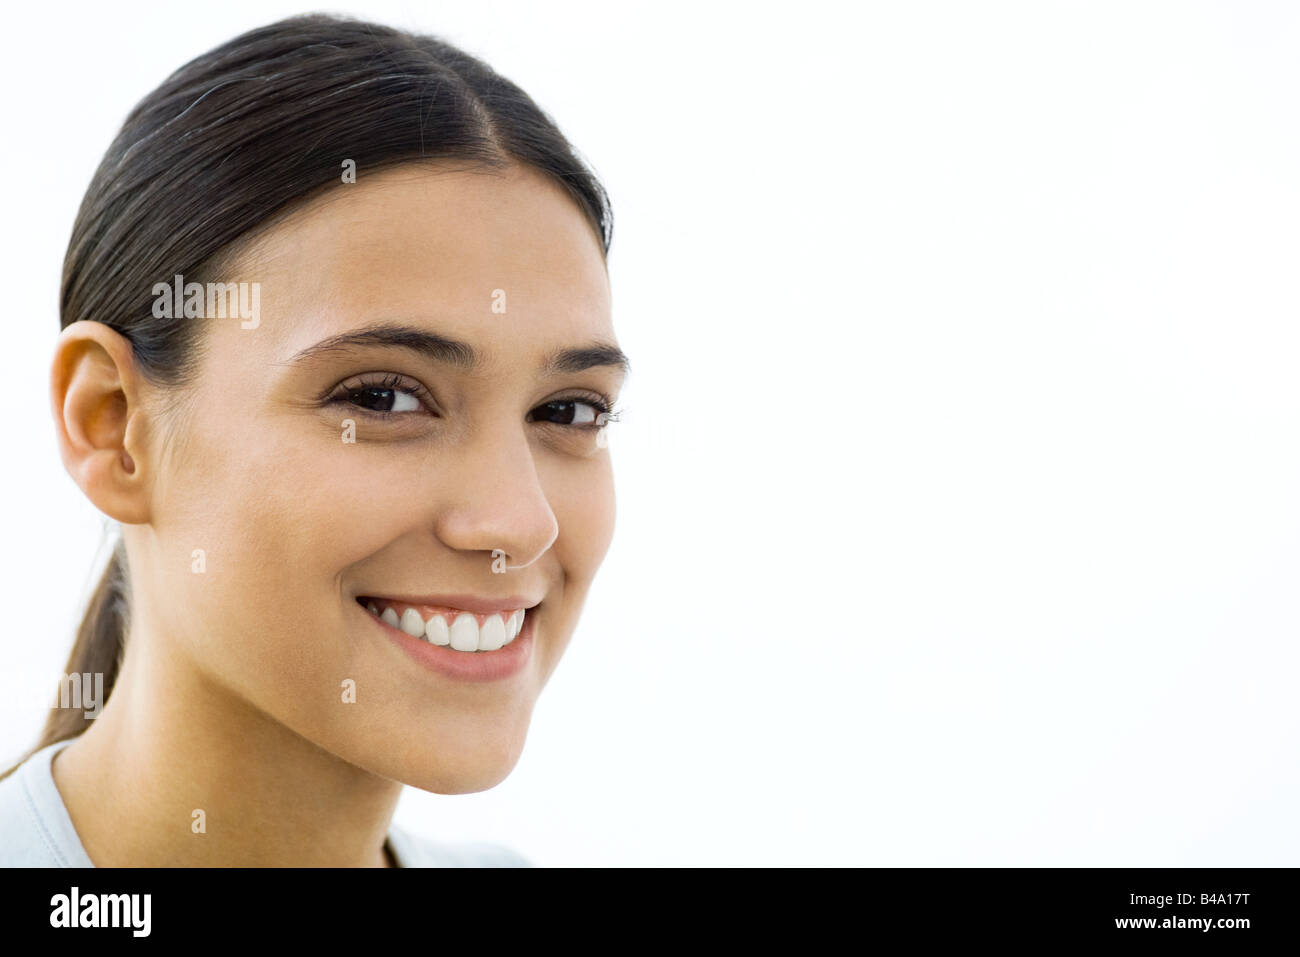 Young woman smiling at camera, portrait Banque D'Images